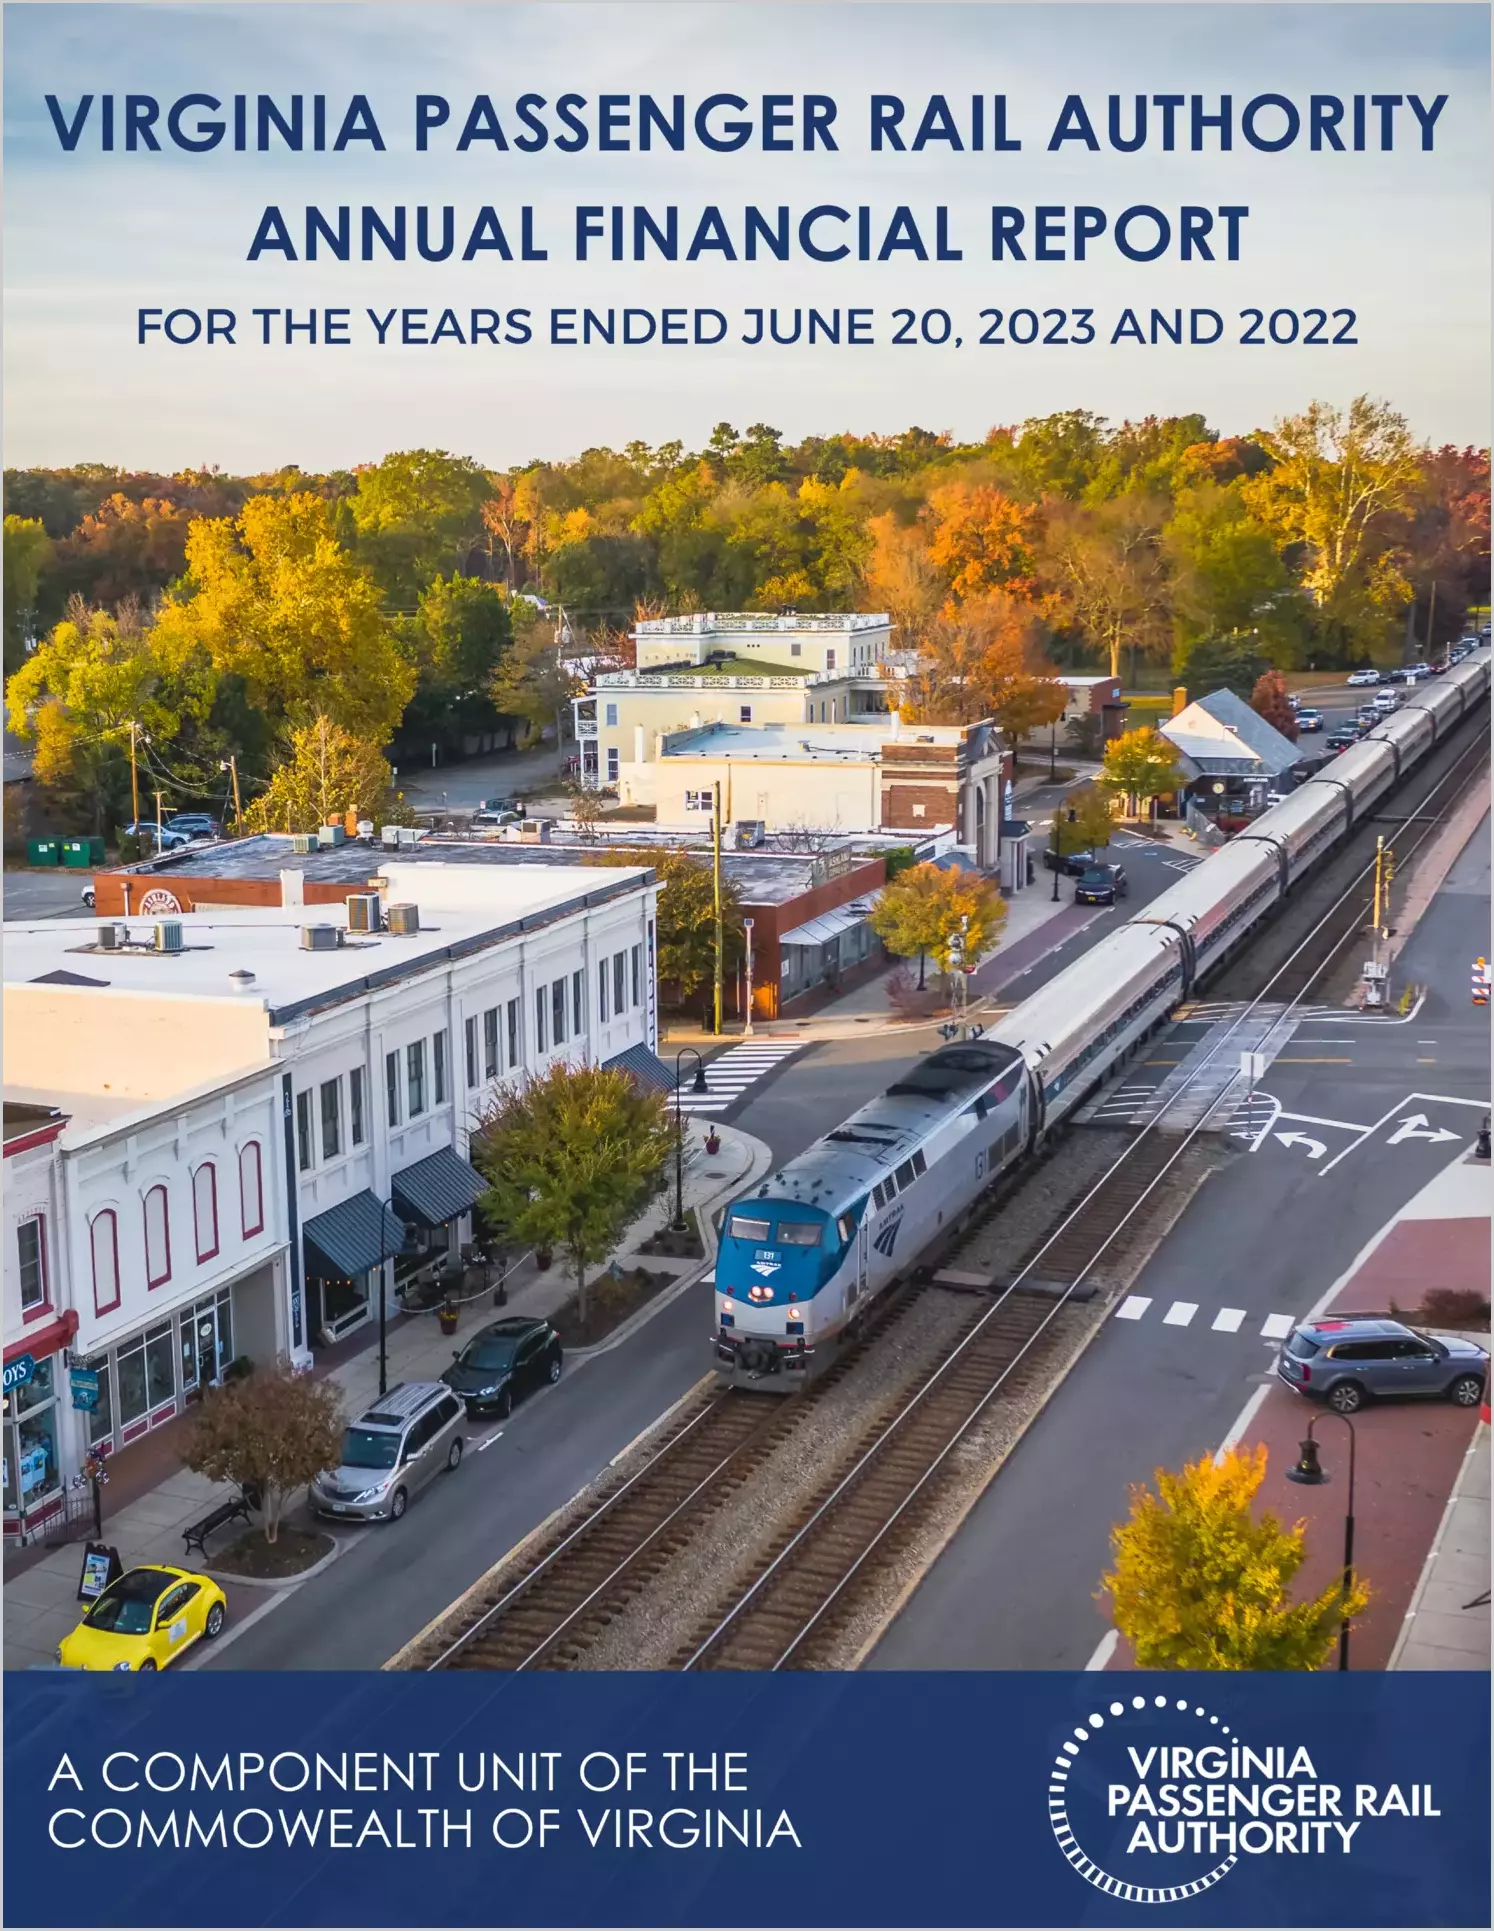 Virginia Passenger Rail Authority for the year ended June 30, 2023